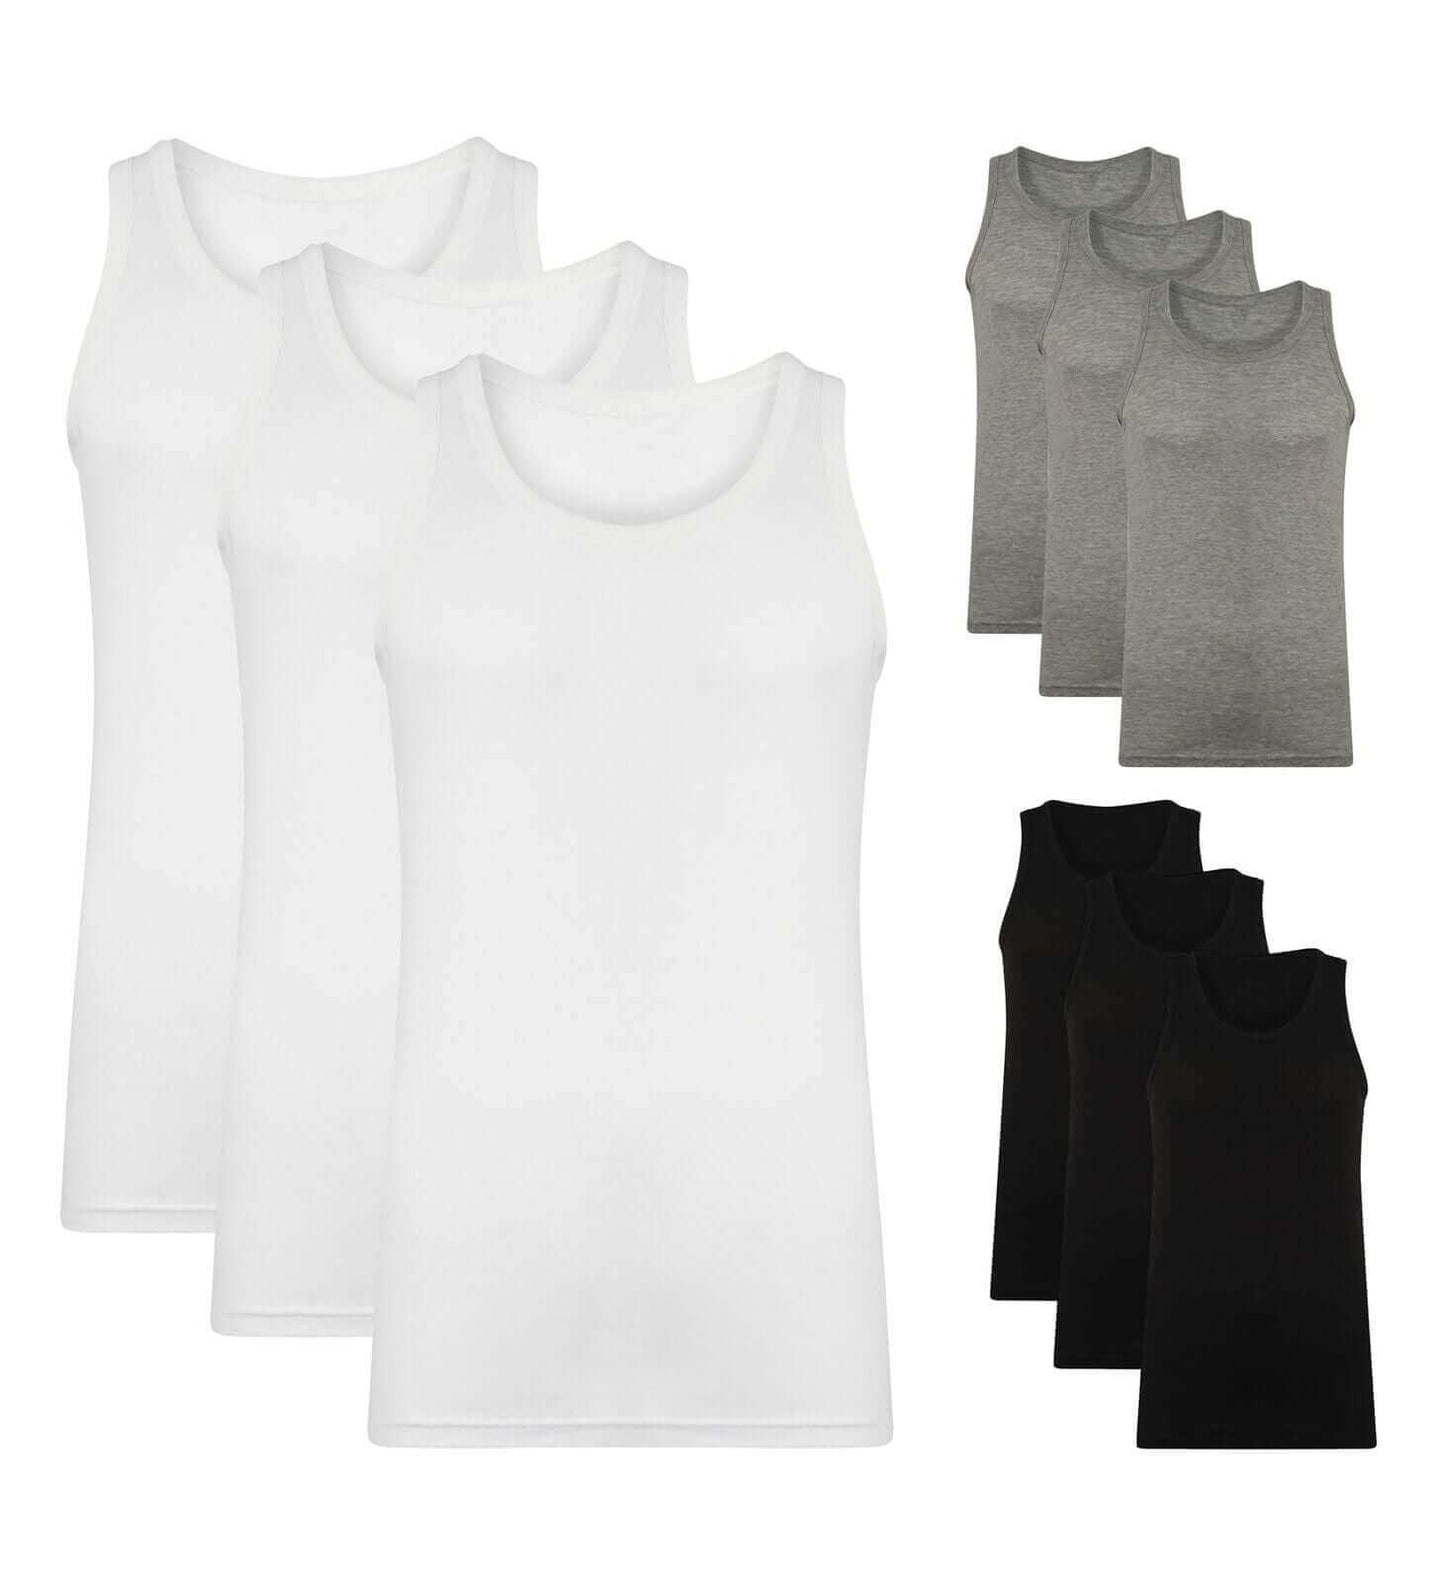 Pack of 3 Men's Vest Fitted Plain 100% Cotton White, Black & Grey. Buy now for £7.00. A Vests by Sock Stack. athletics, black, boys, clothing, comfortable, cotton, grey, gym, man, medium, mens, small, sports, summer, underwear, vests, white, x large, xx l